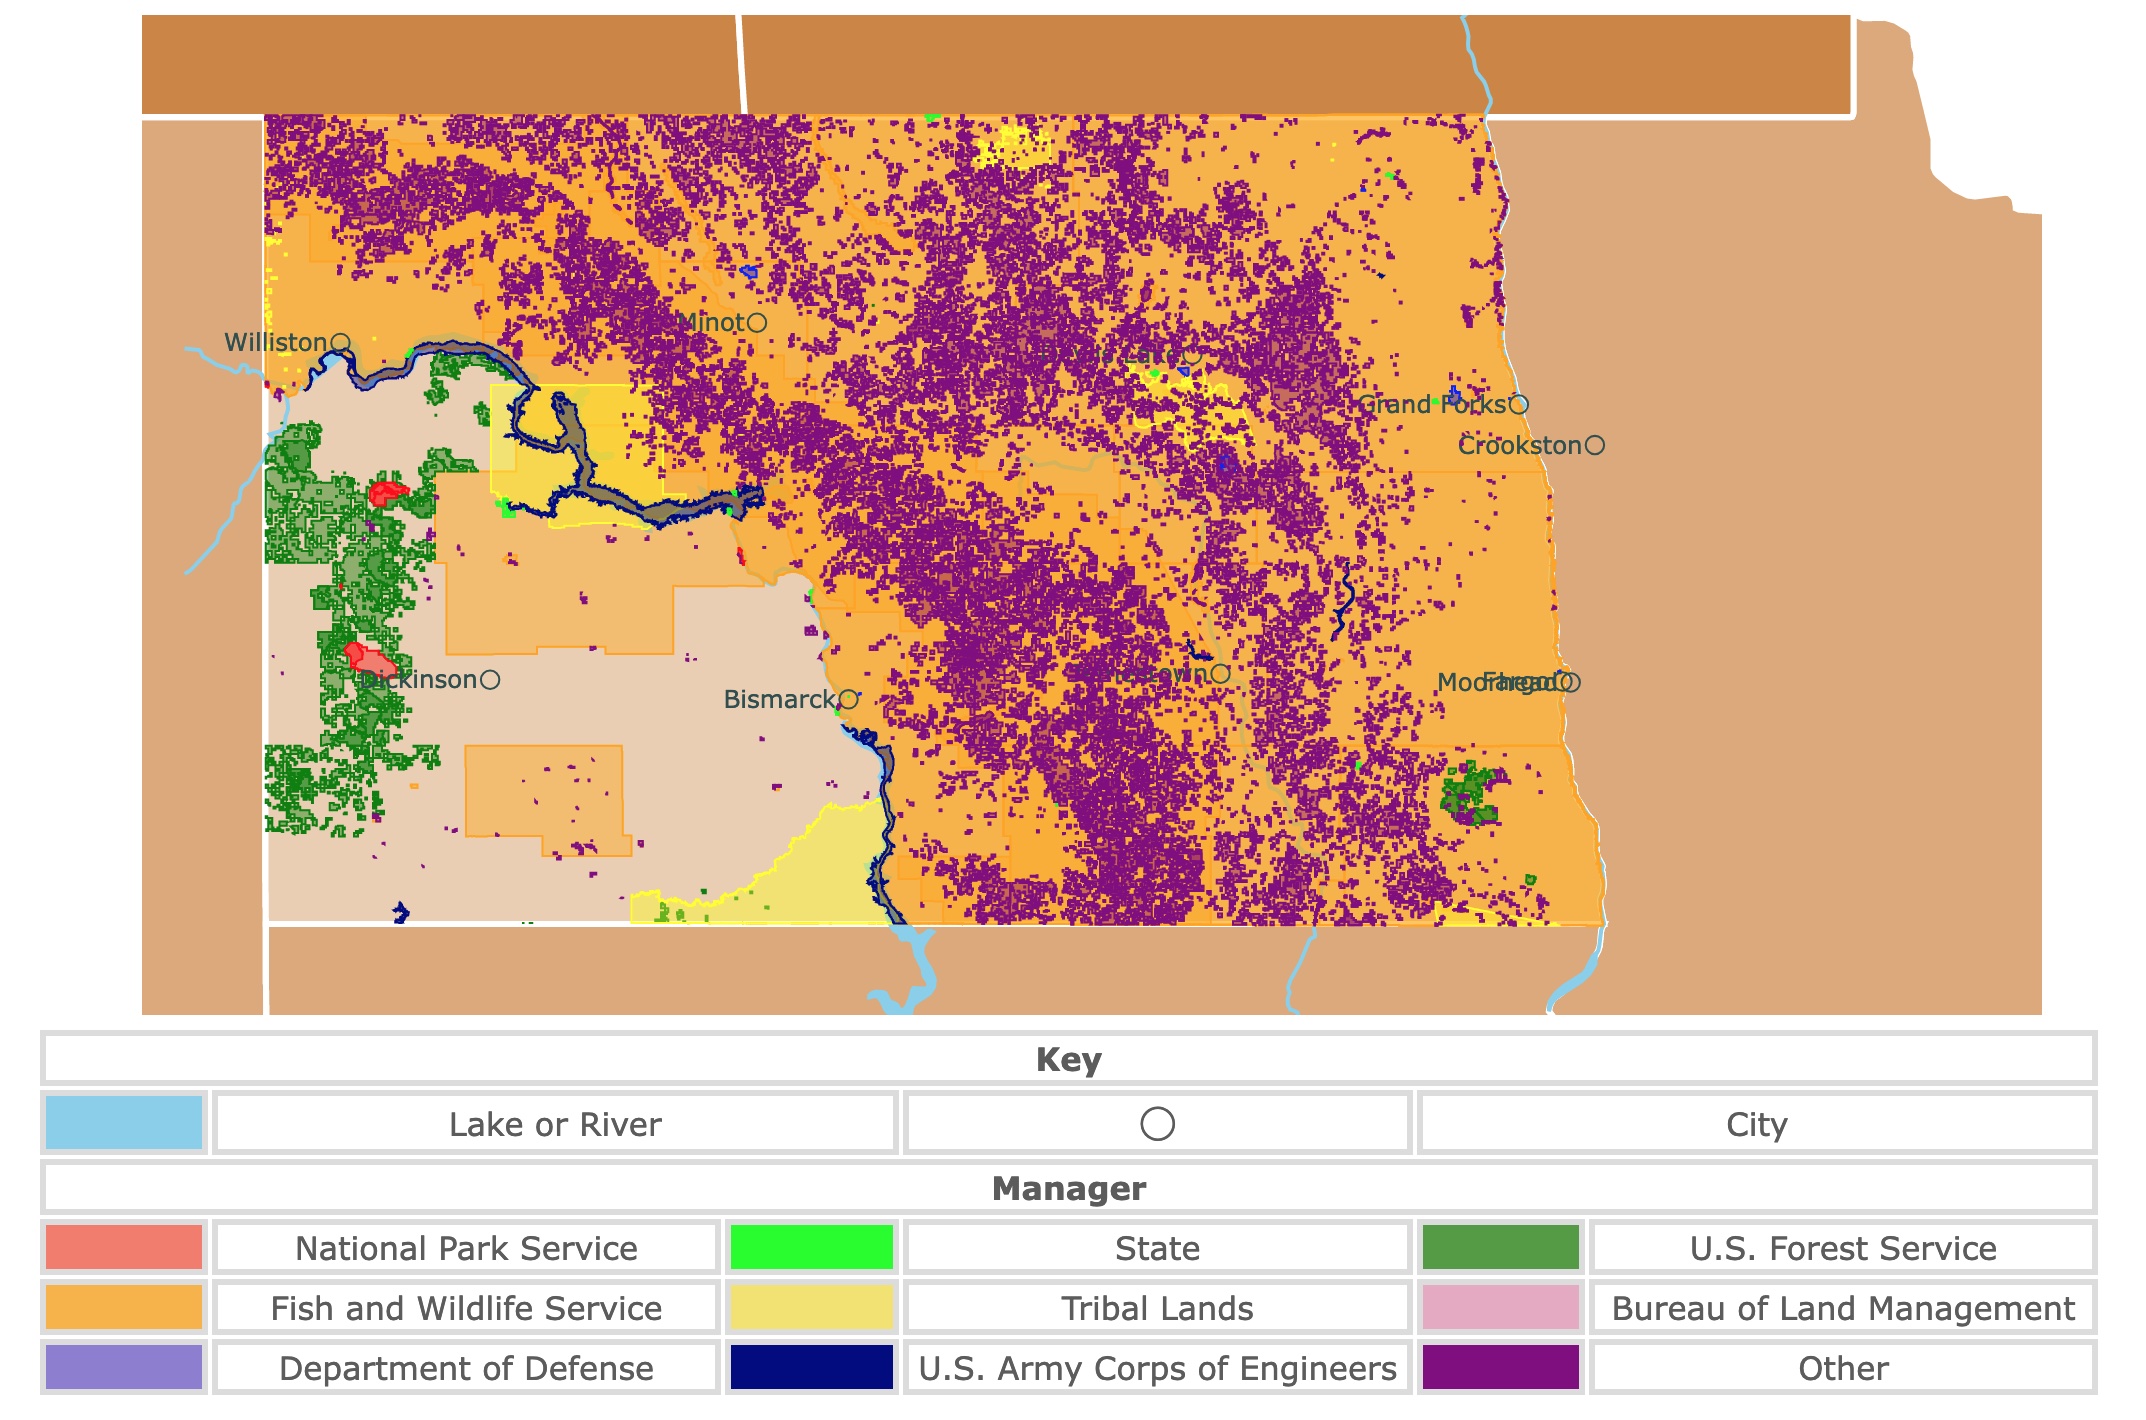 Map of North Dakota's state parks, national parks, forests, and public lands areas